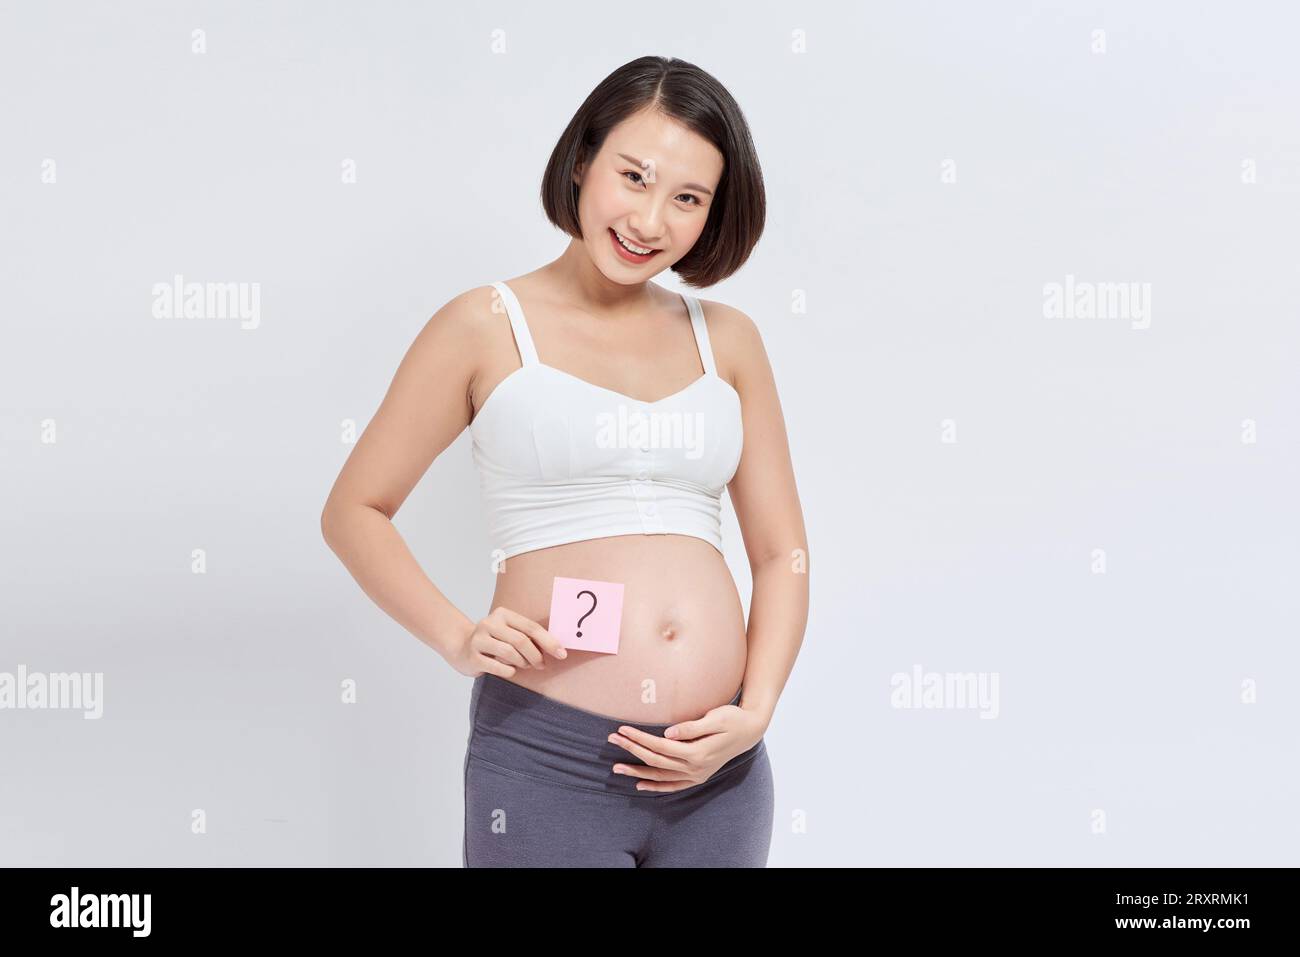 Pregnant woman with a sticky note, which is drawing a question sign, on her belly Stock Photo